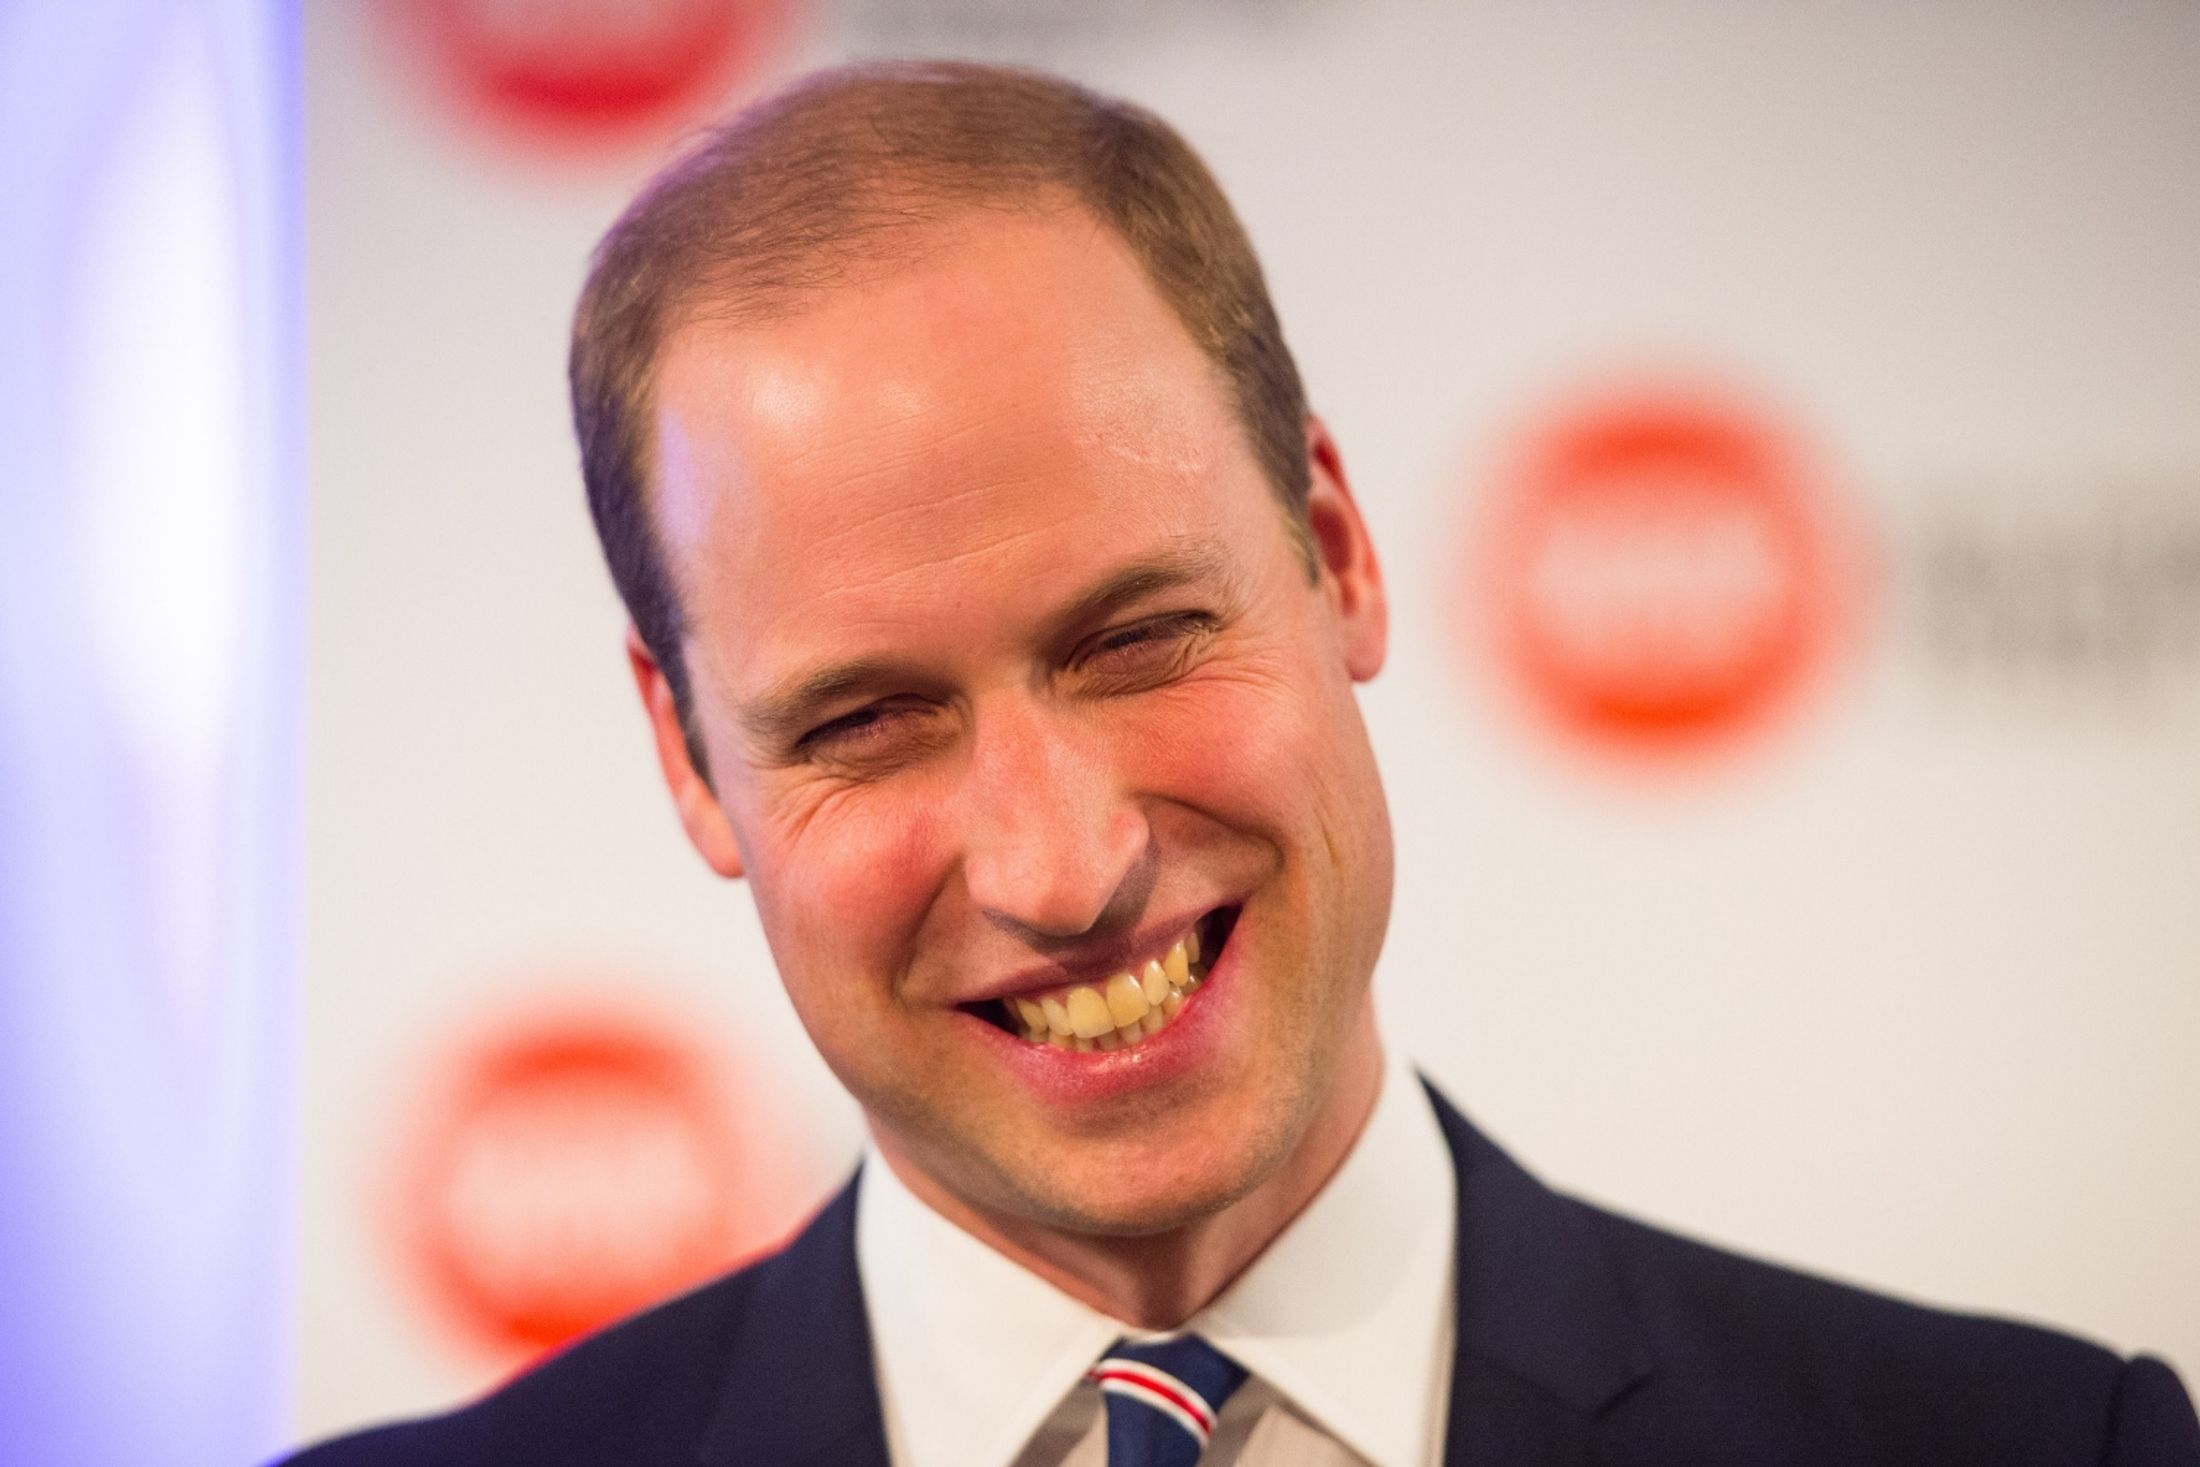 Prince William accidentally jabbed Dame Emma Thompson with pin | That's